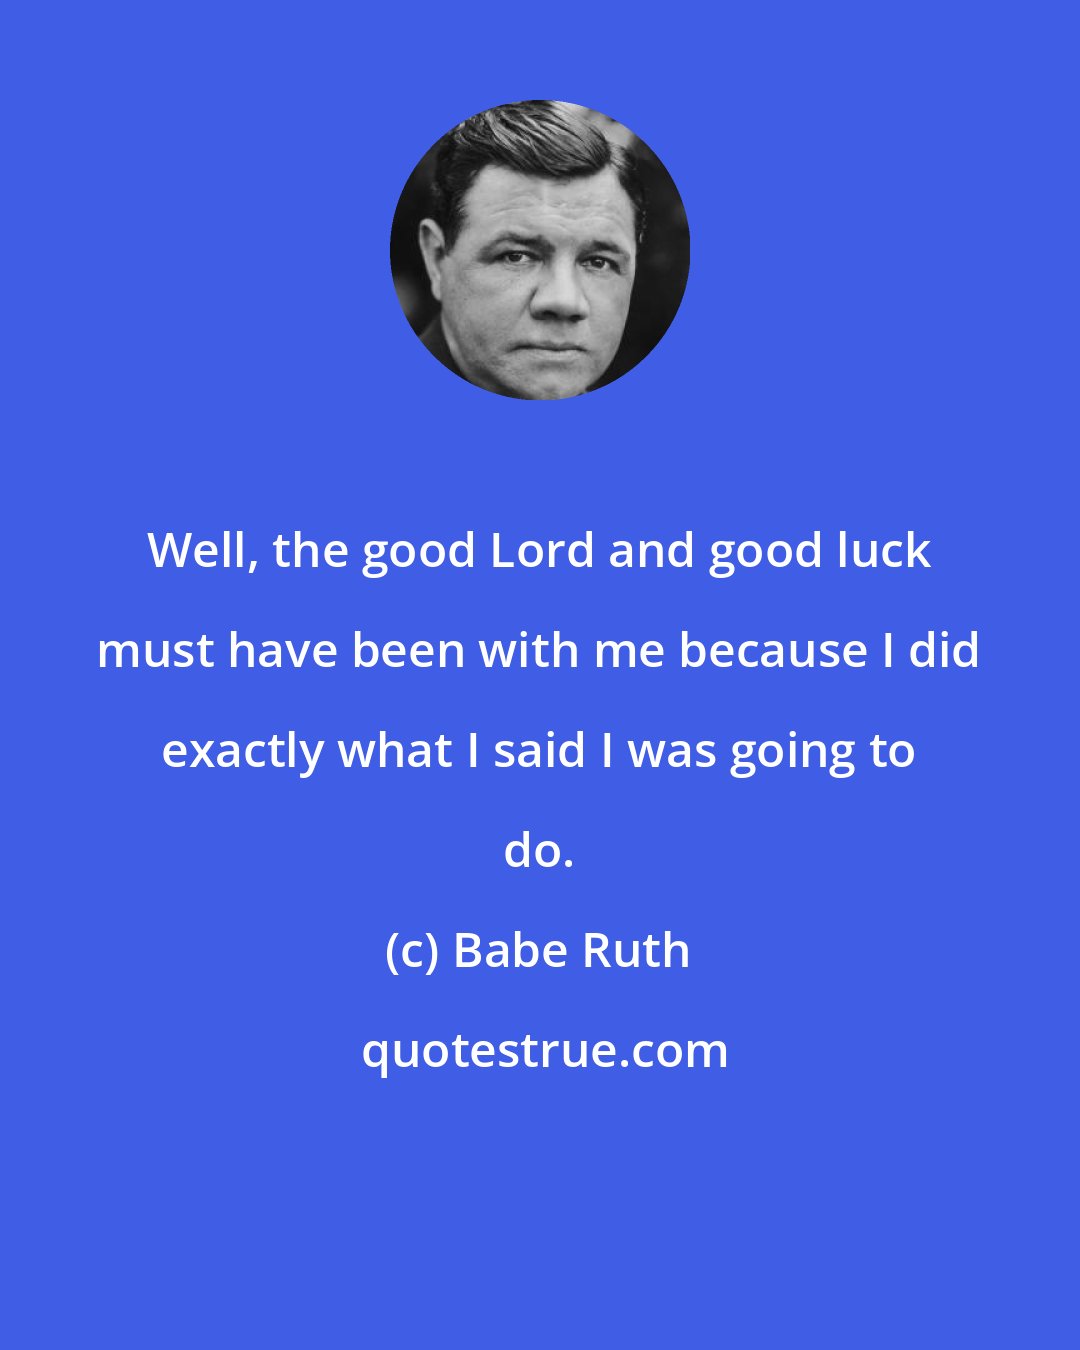 Babe Ruth: Well, the good Lord and good luck must have been with me because I did exactly what I said I was going to do.